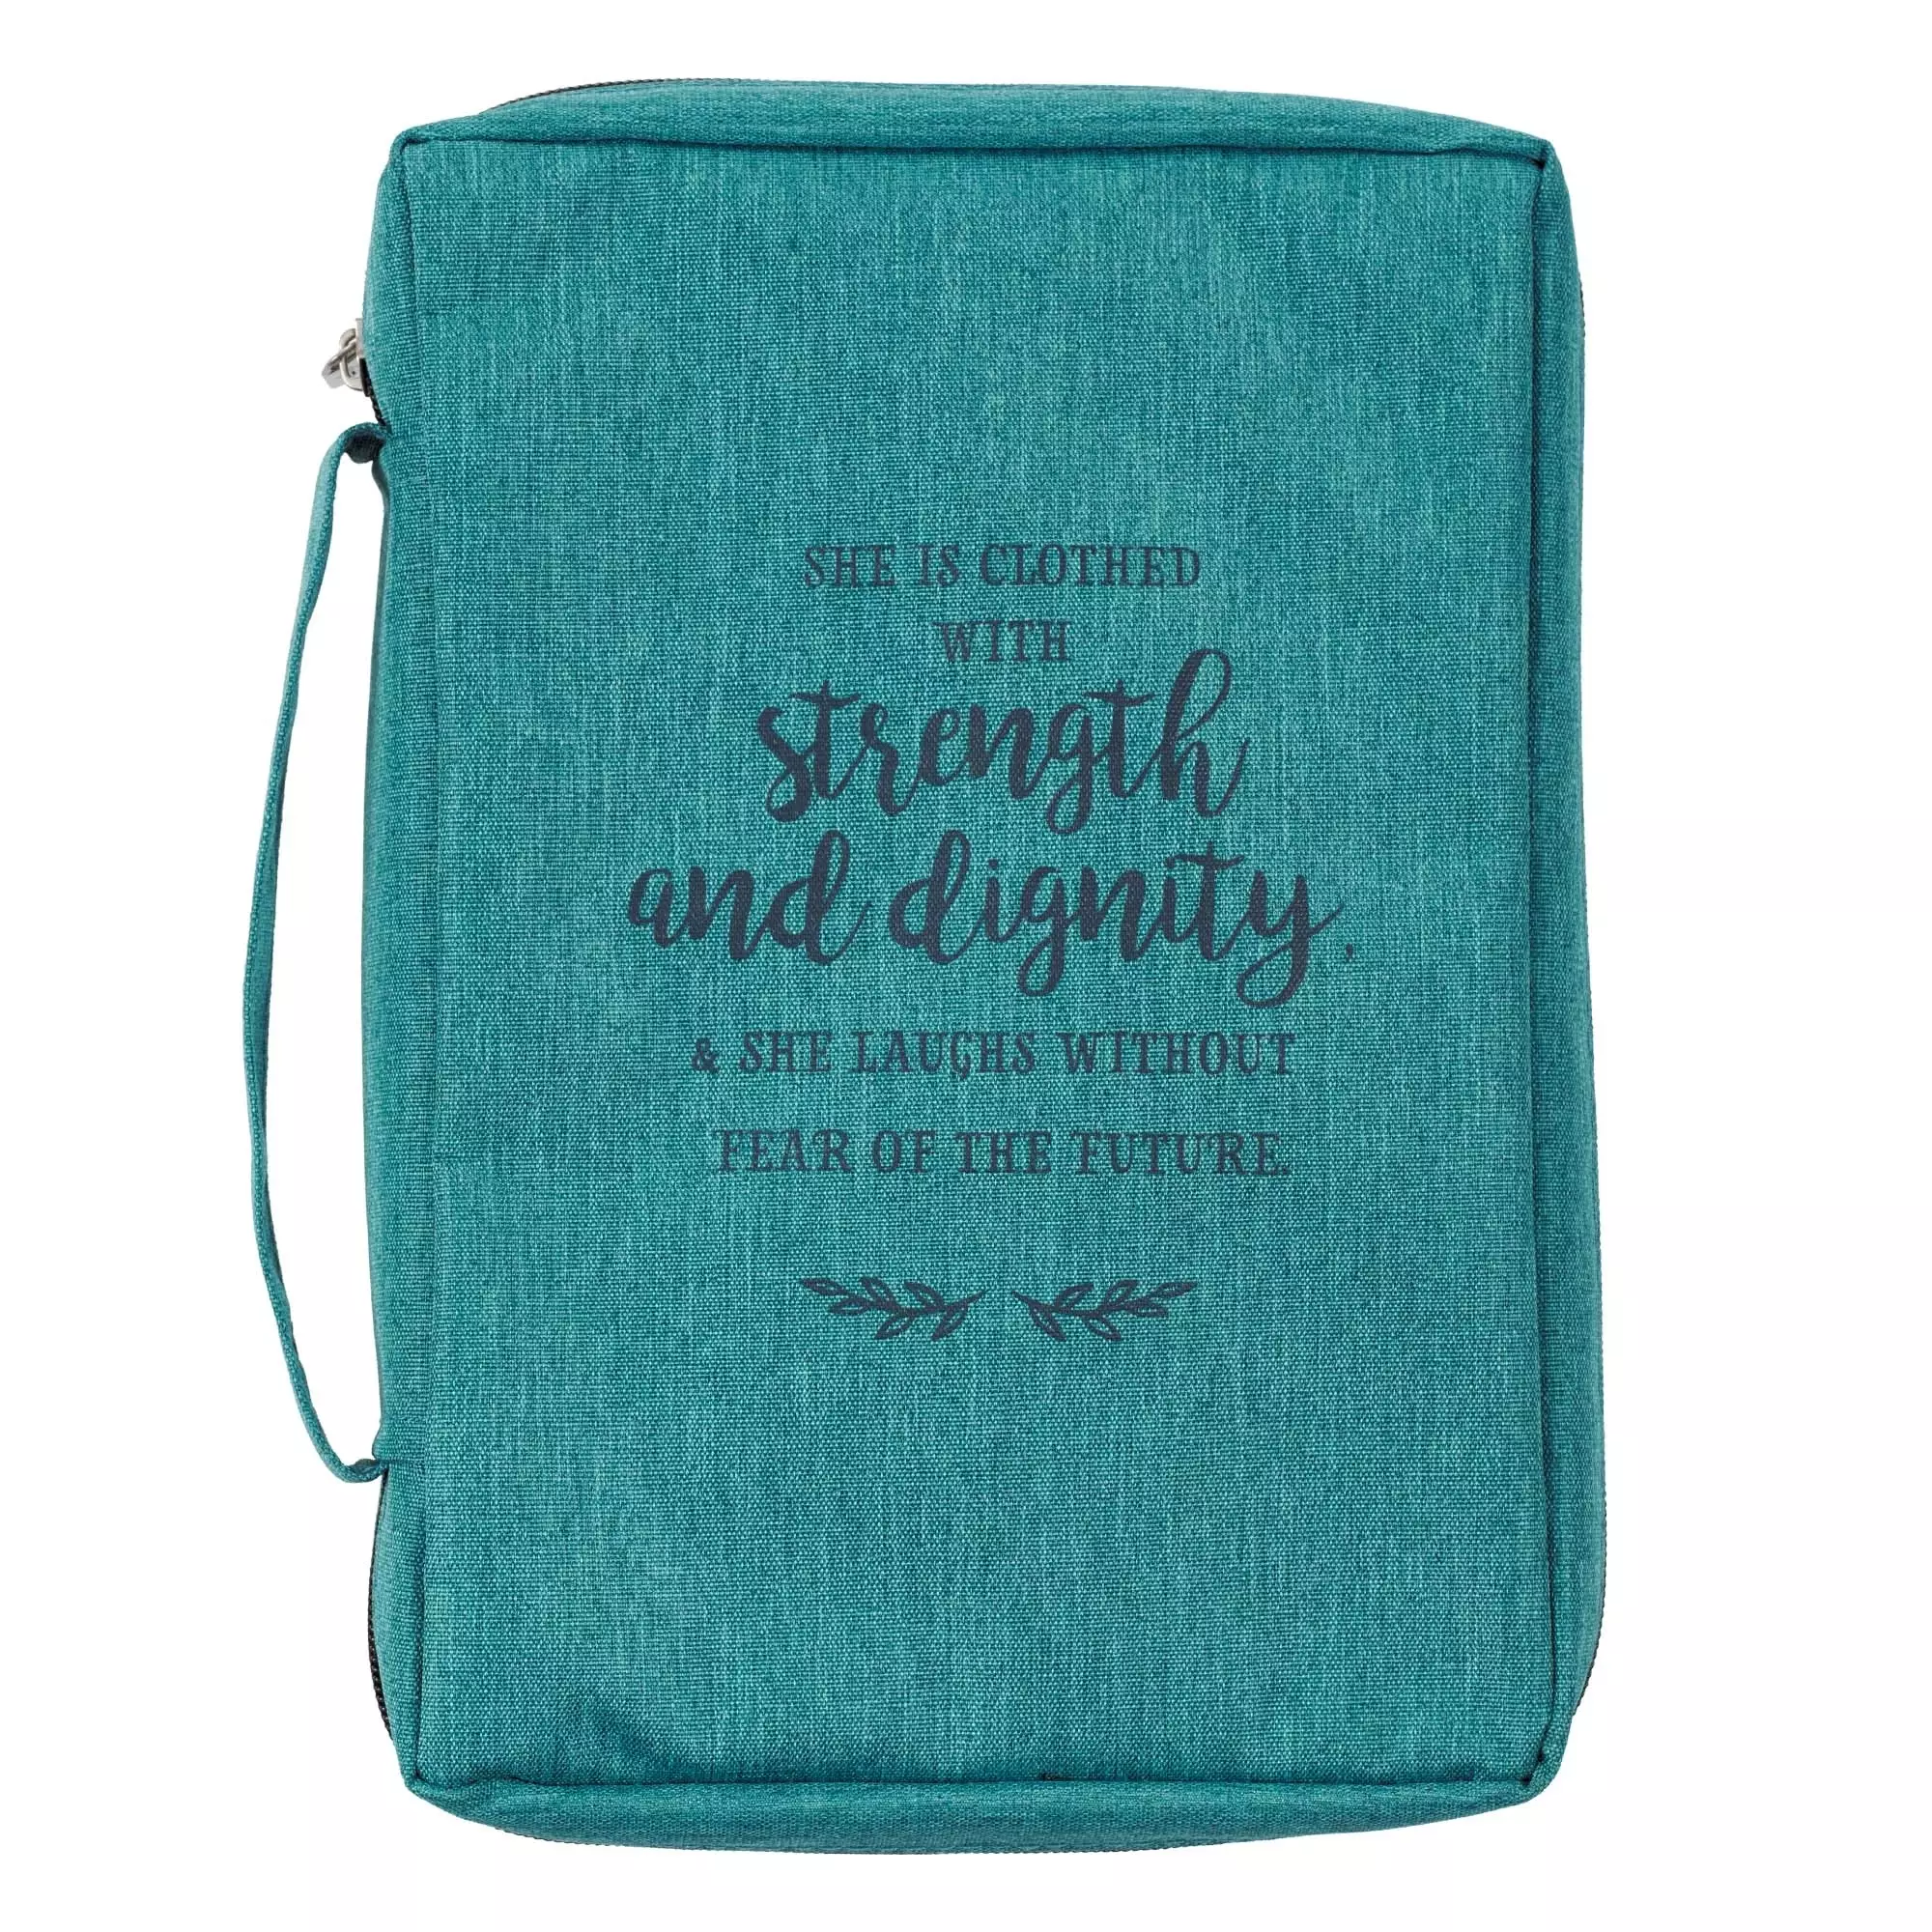 Medium Strength & Dignity Proverbs 31:25, Teal Canvas Bible Cover